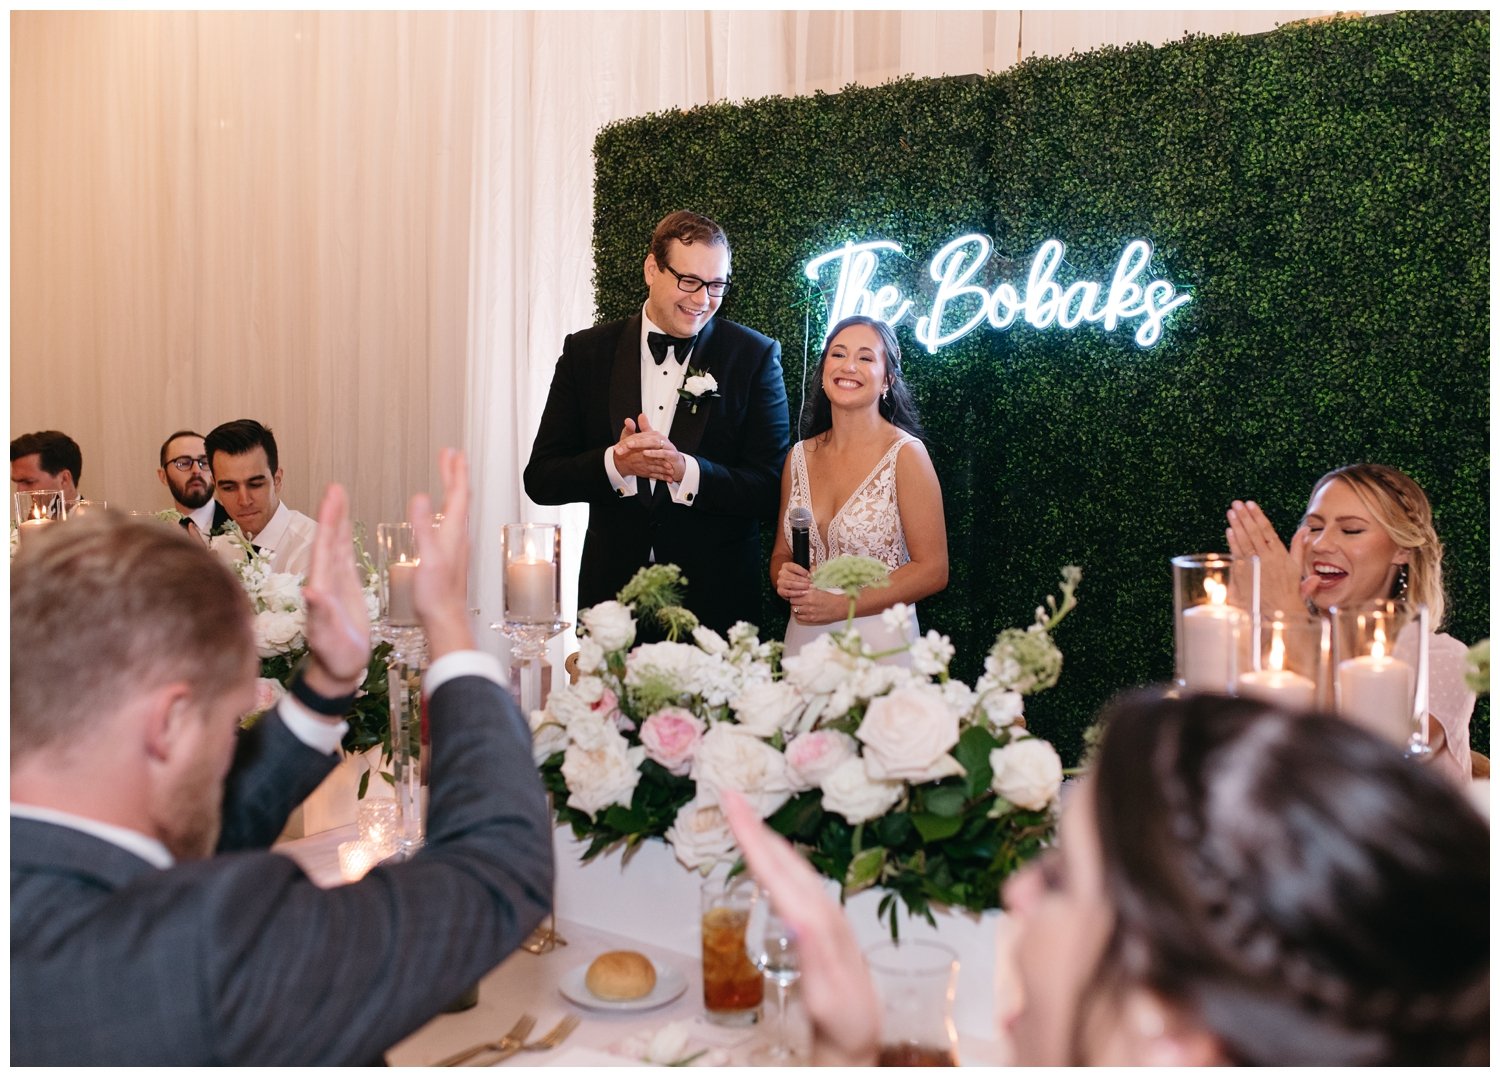 The bride and groom welcome guests to the Ponce City Market wedding reception